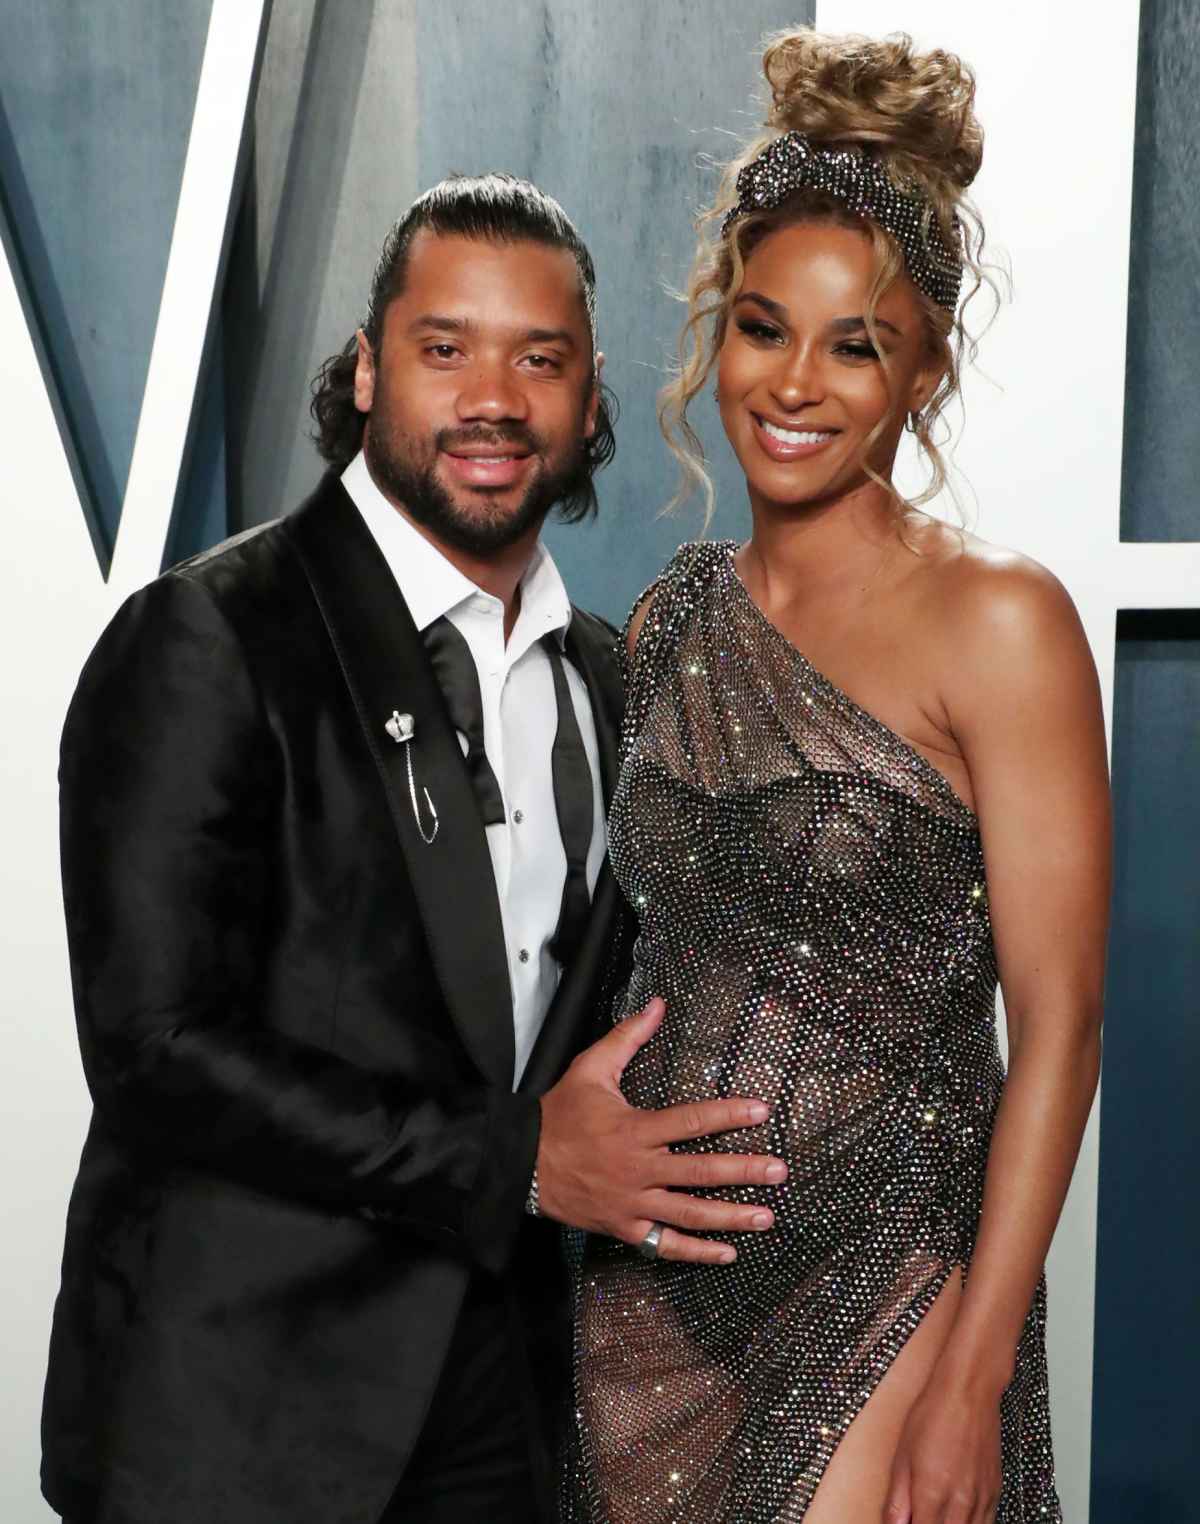 CiCi Plus 3? Ciara Talks Having More Children With Husband Russell